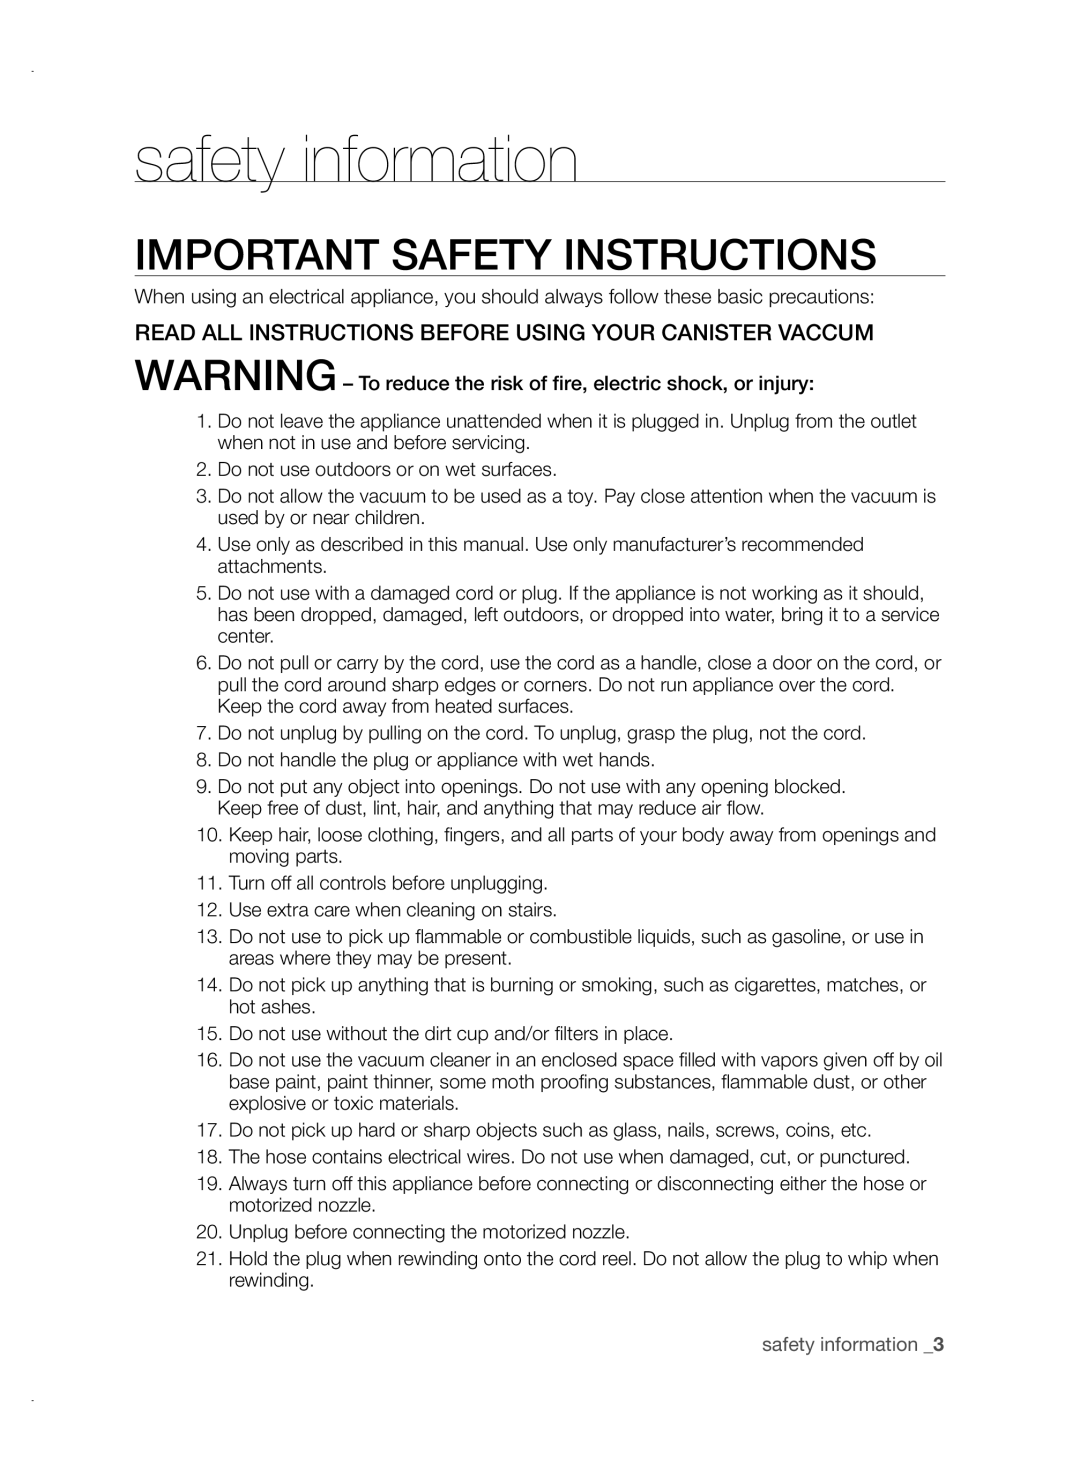 Samsung VCC88P0H1B user manual Important Safety Instructions, safety information 